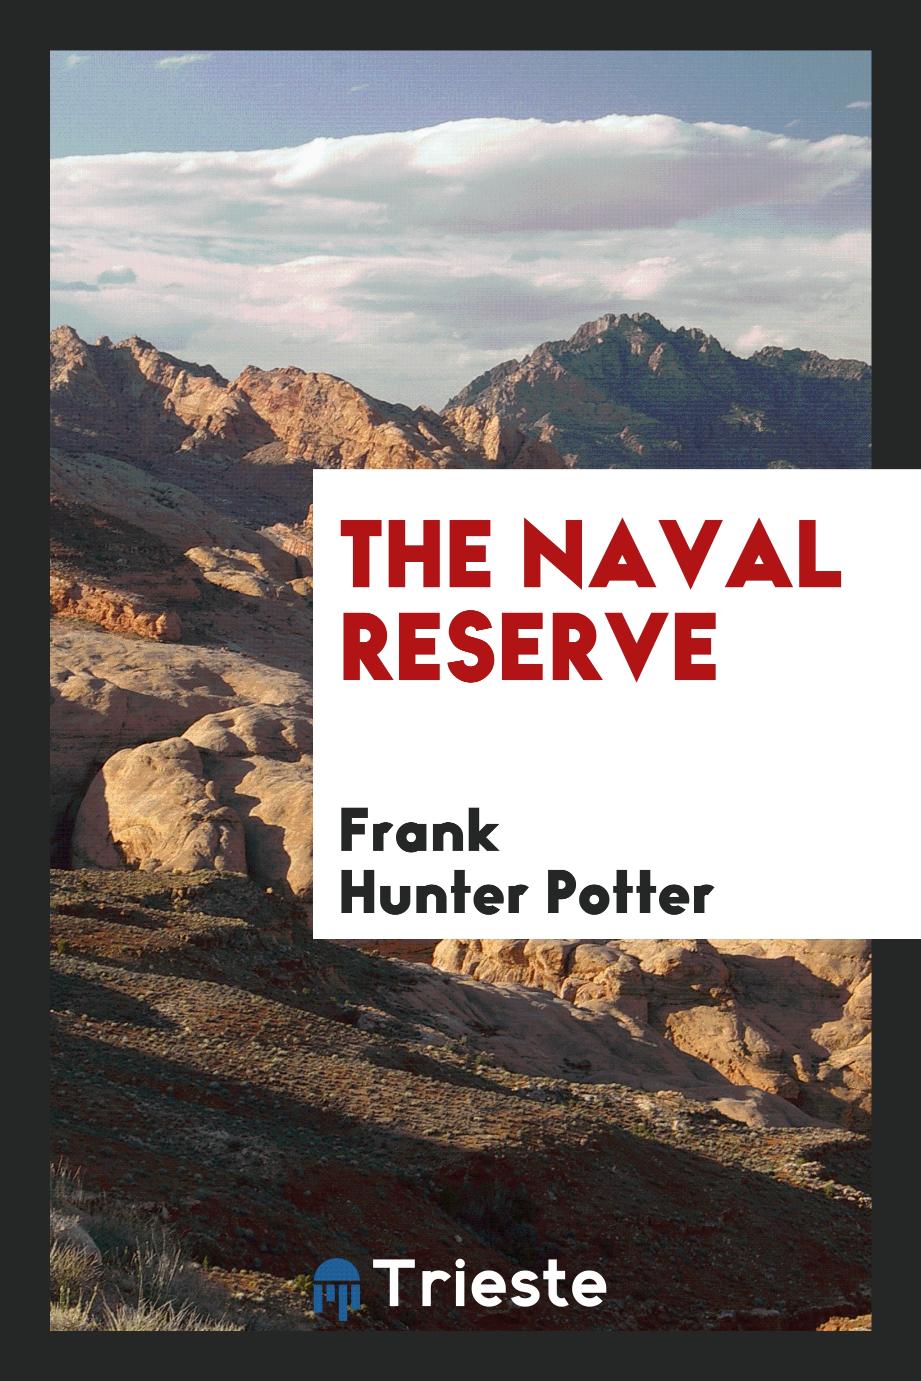 The Naval reserve